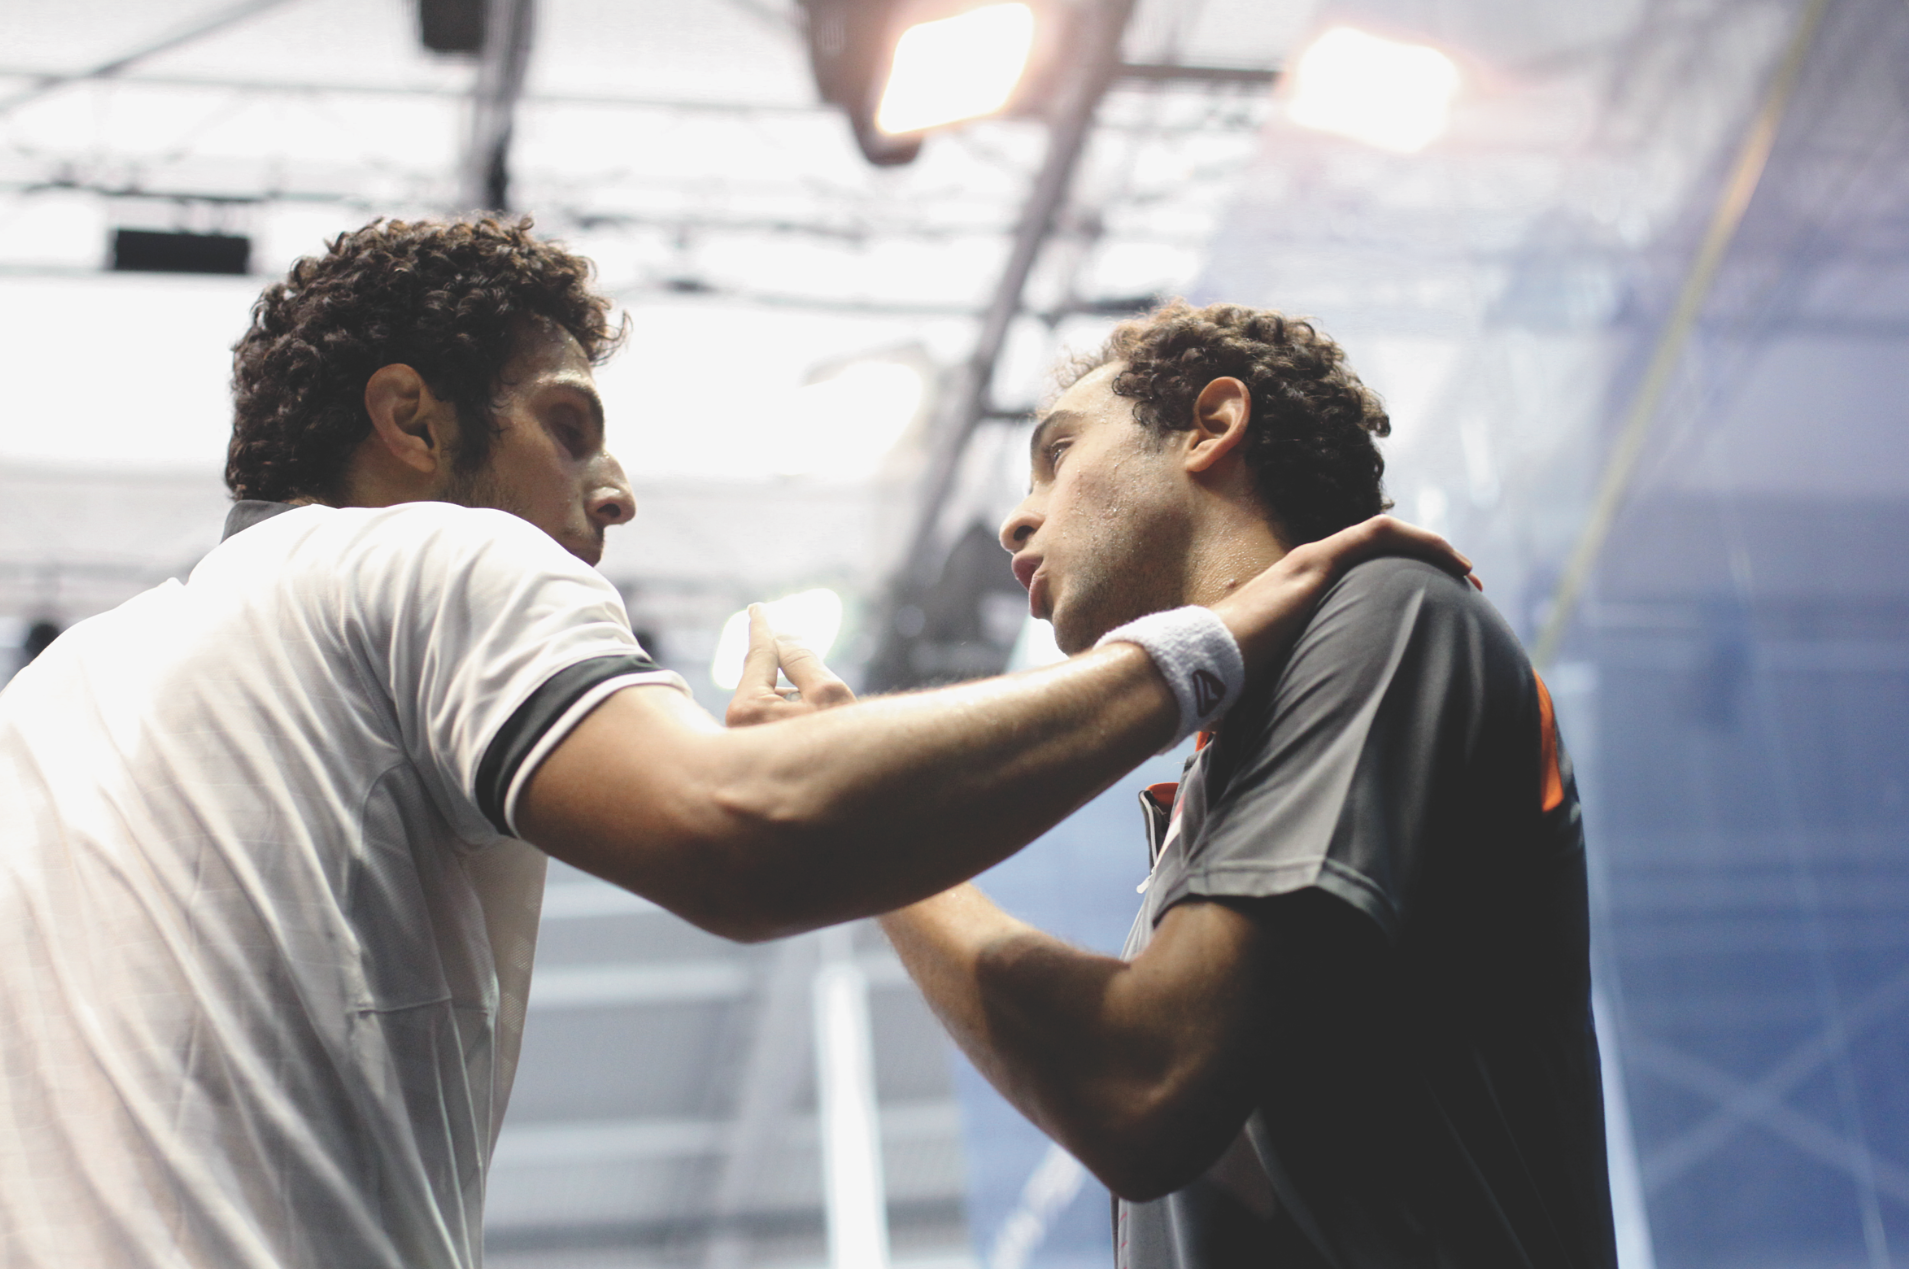 In a highly contentious opening round match, Egyptians Omar Mosaad (In white) and Ramy Ashour squared off for the 16th time since 2006, with the same result—an Ashour victory. 